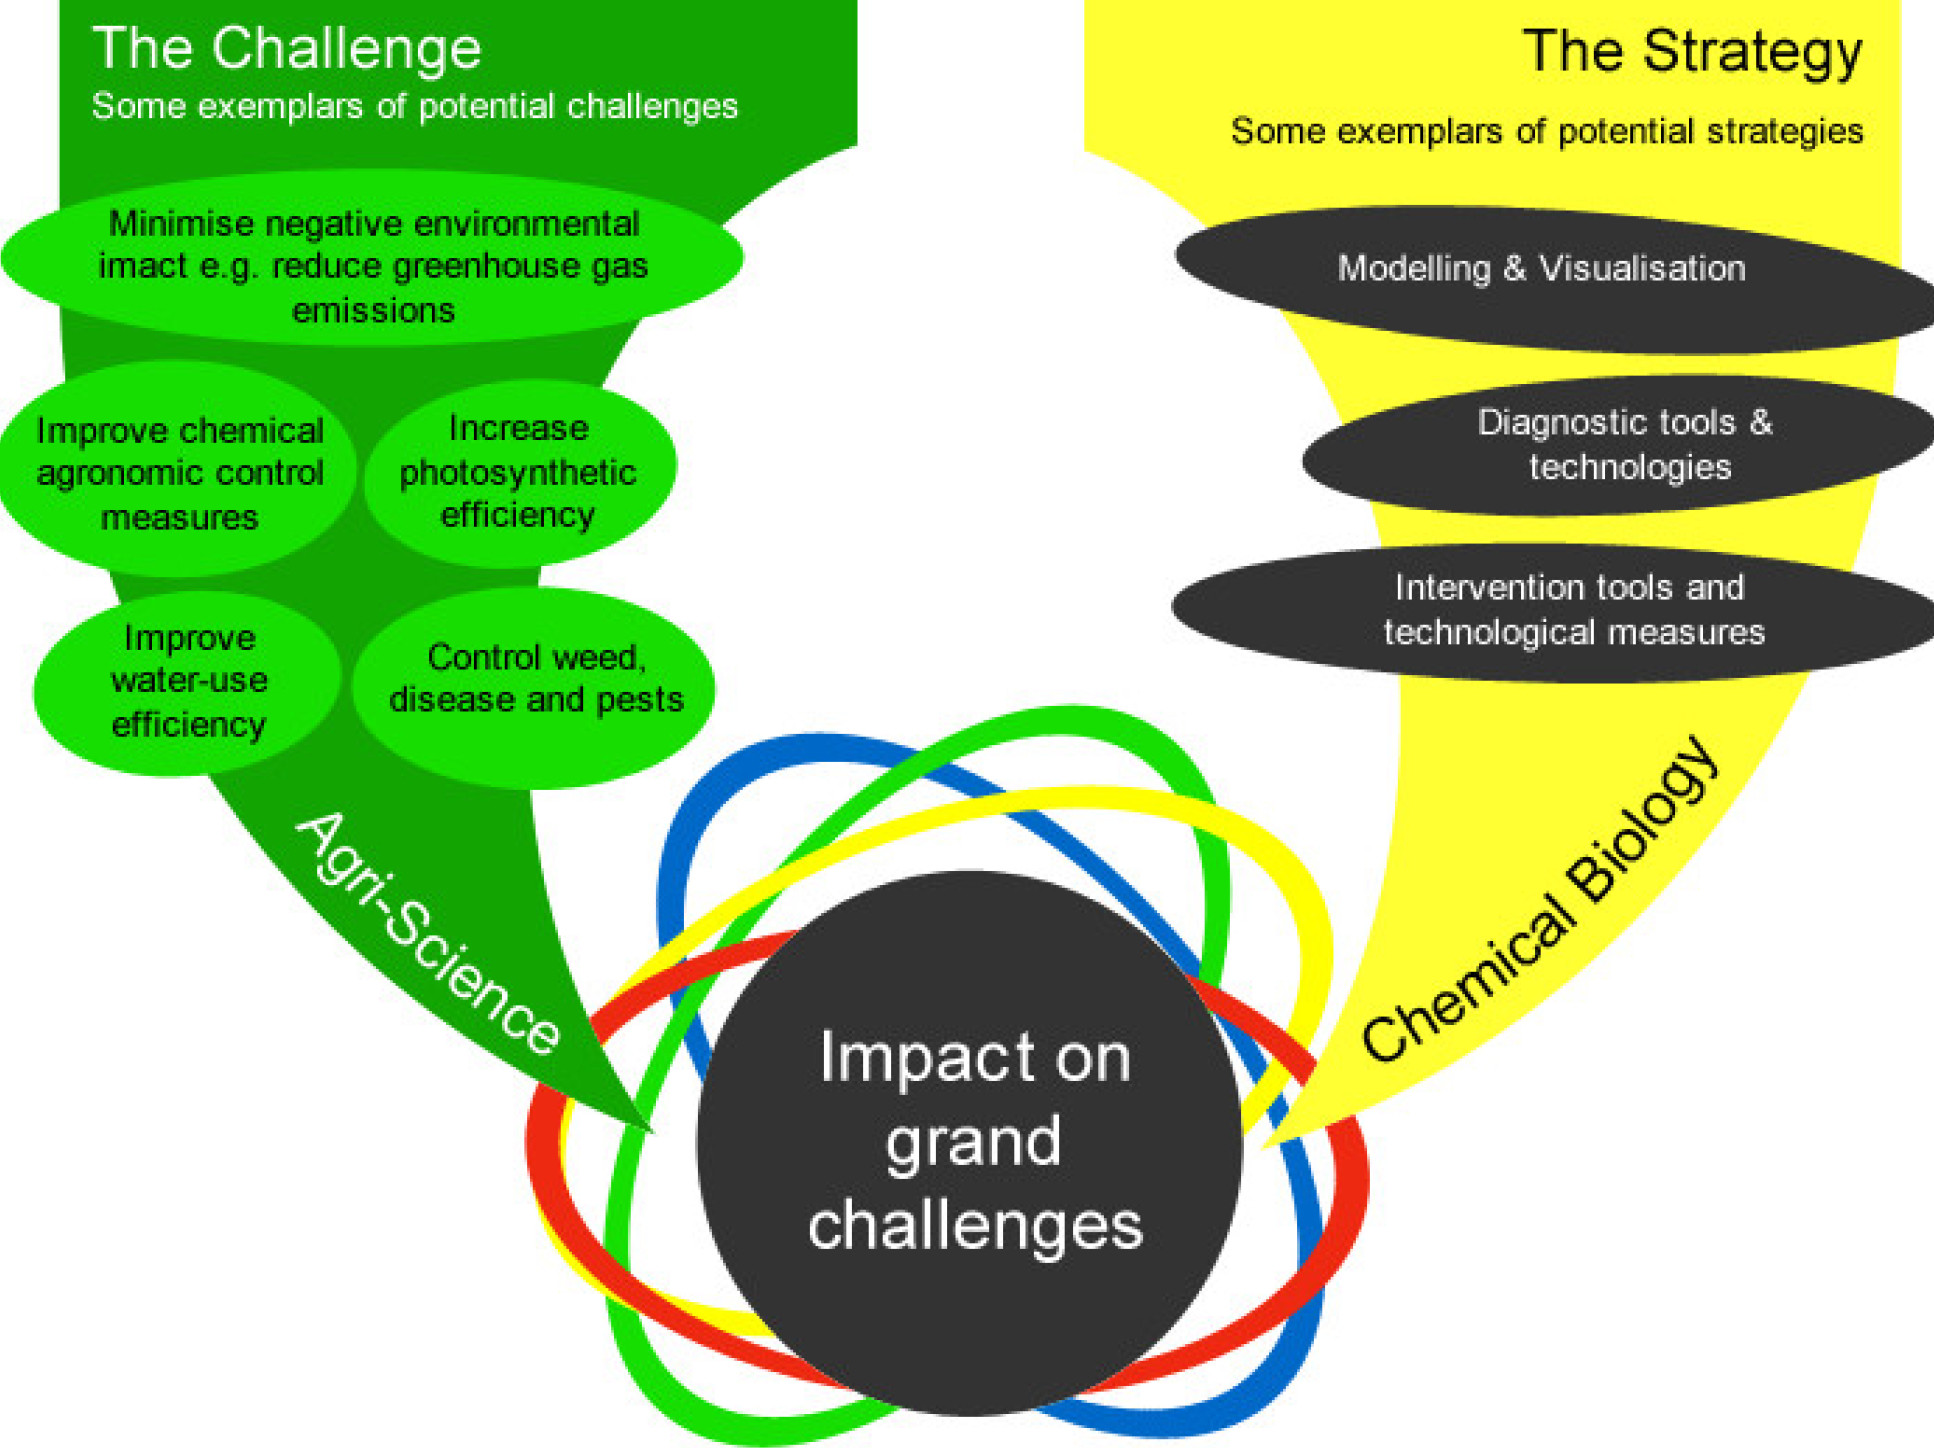 Visualisation showing potential strategies can overcome the challenges.